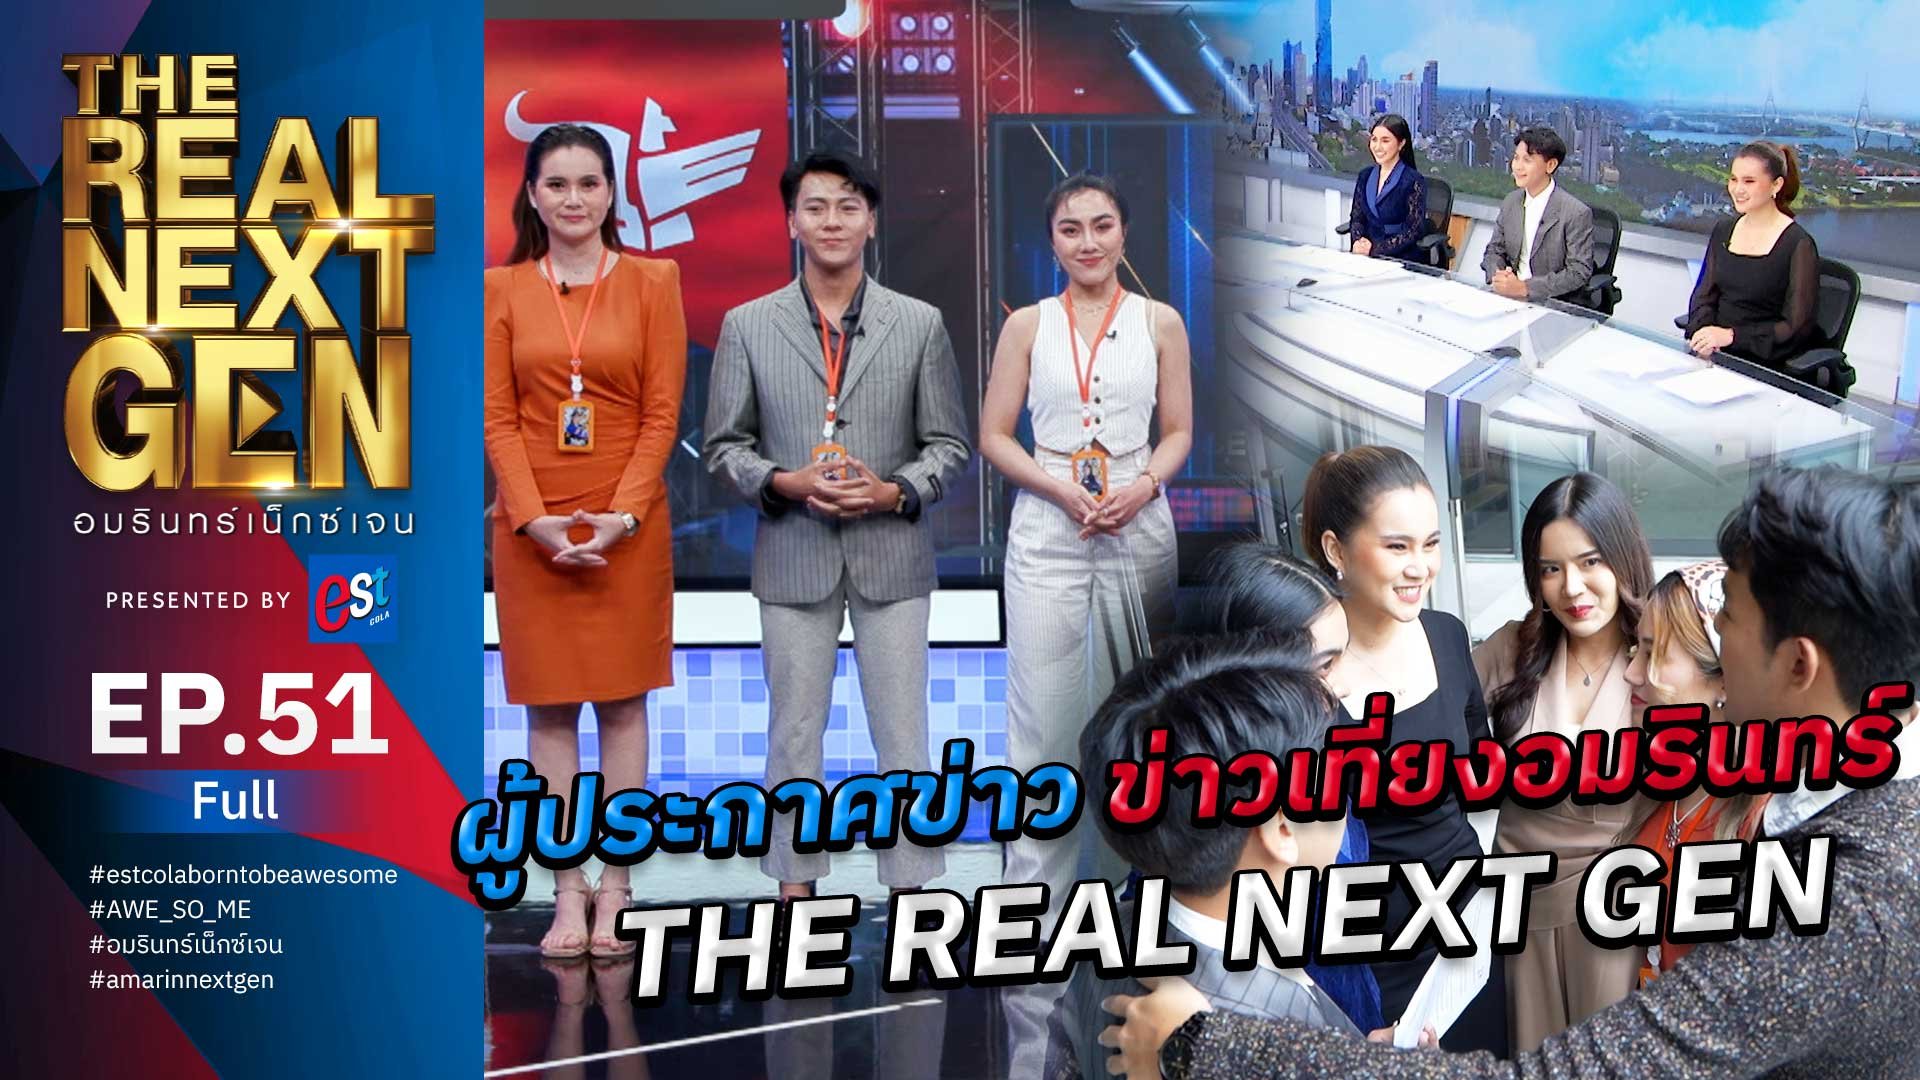 The Real Next Gen อมรินทร์เน็กซ์เจน | EP.51 THE REAL NEXT GEN อมรินทร์เน็กซ์เจน Presented By est cola  | 27 พ.ย. 66 | AMARIN TVHD34